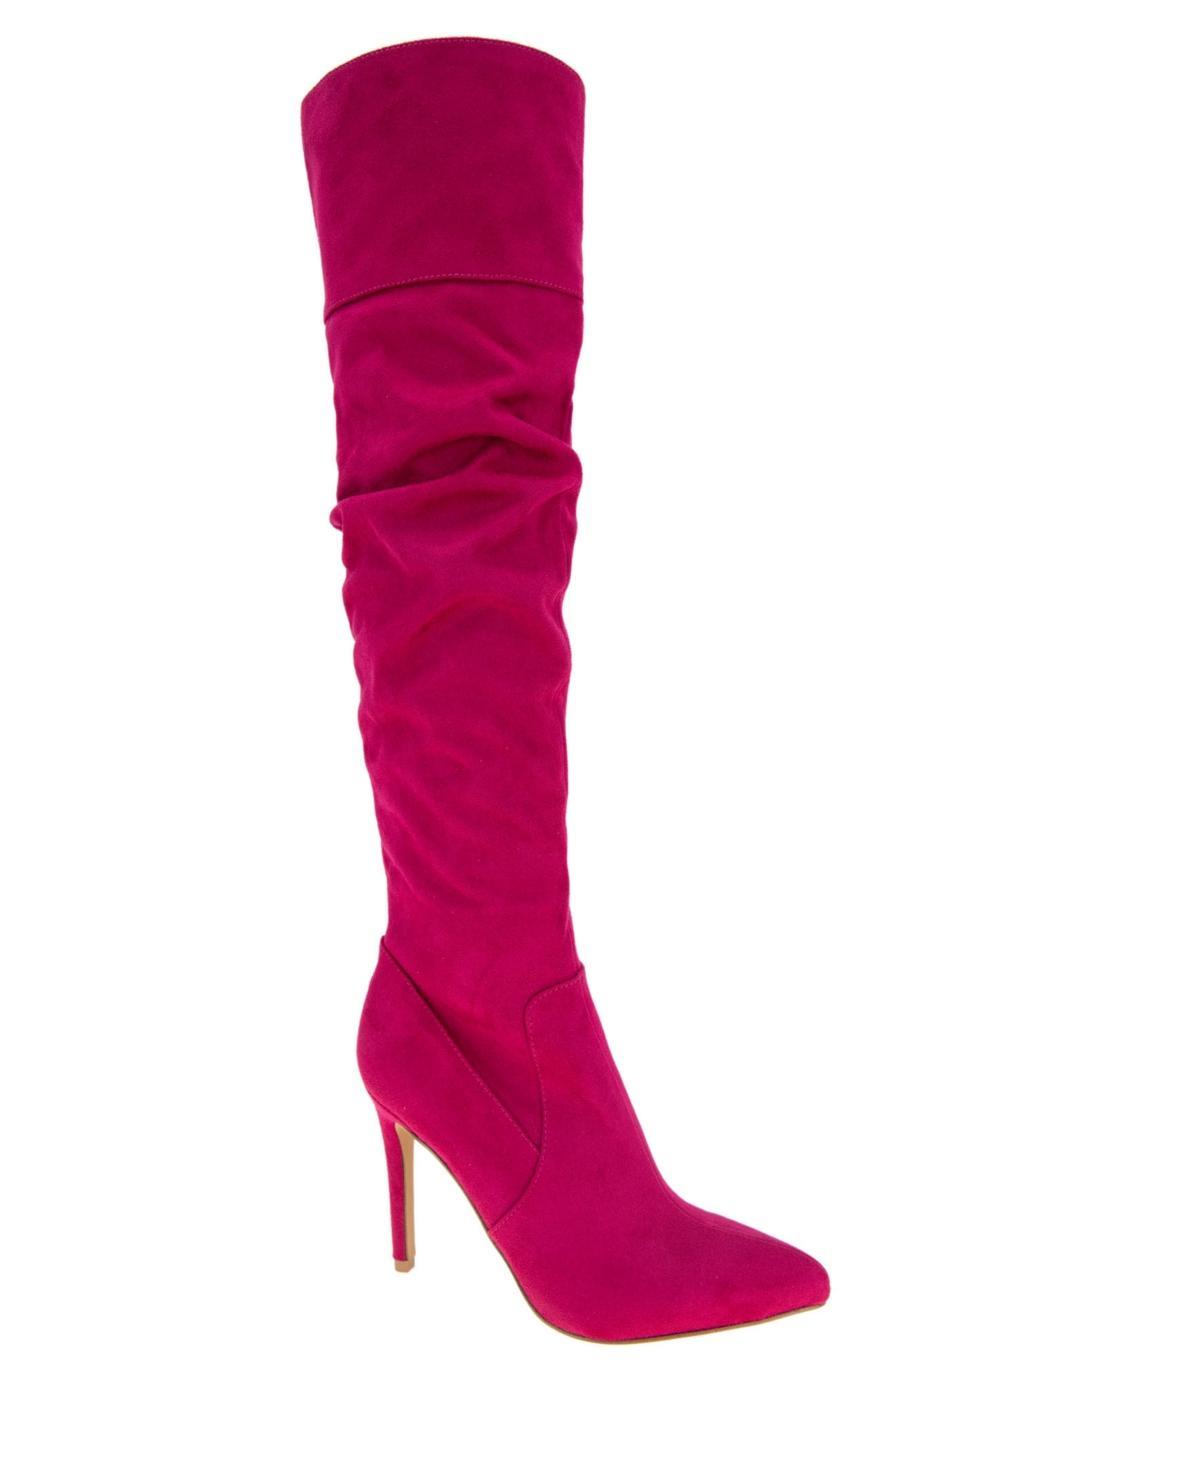 bcbg Himani Over the Knee Boot Product Image